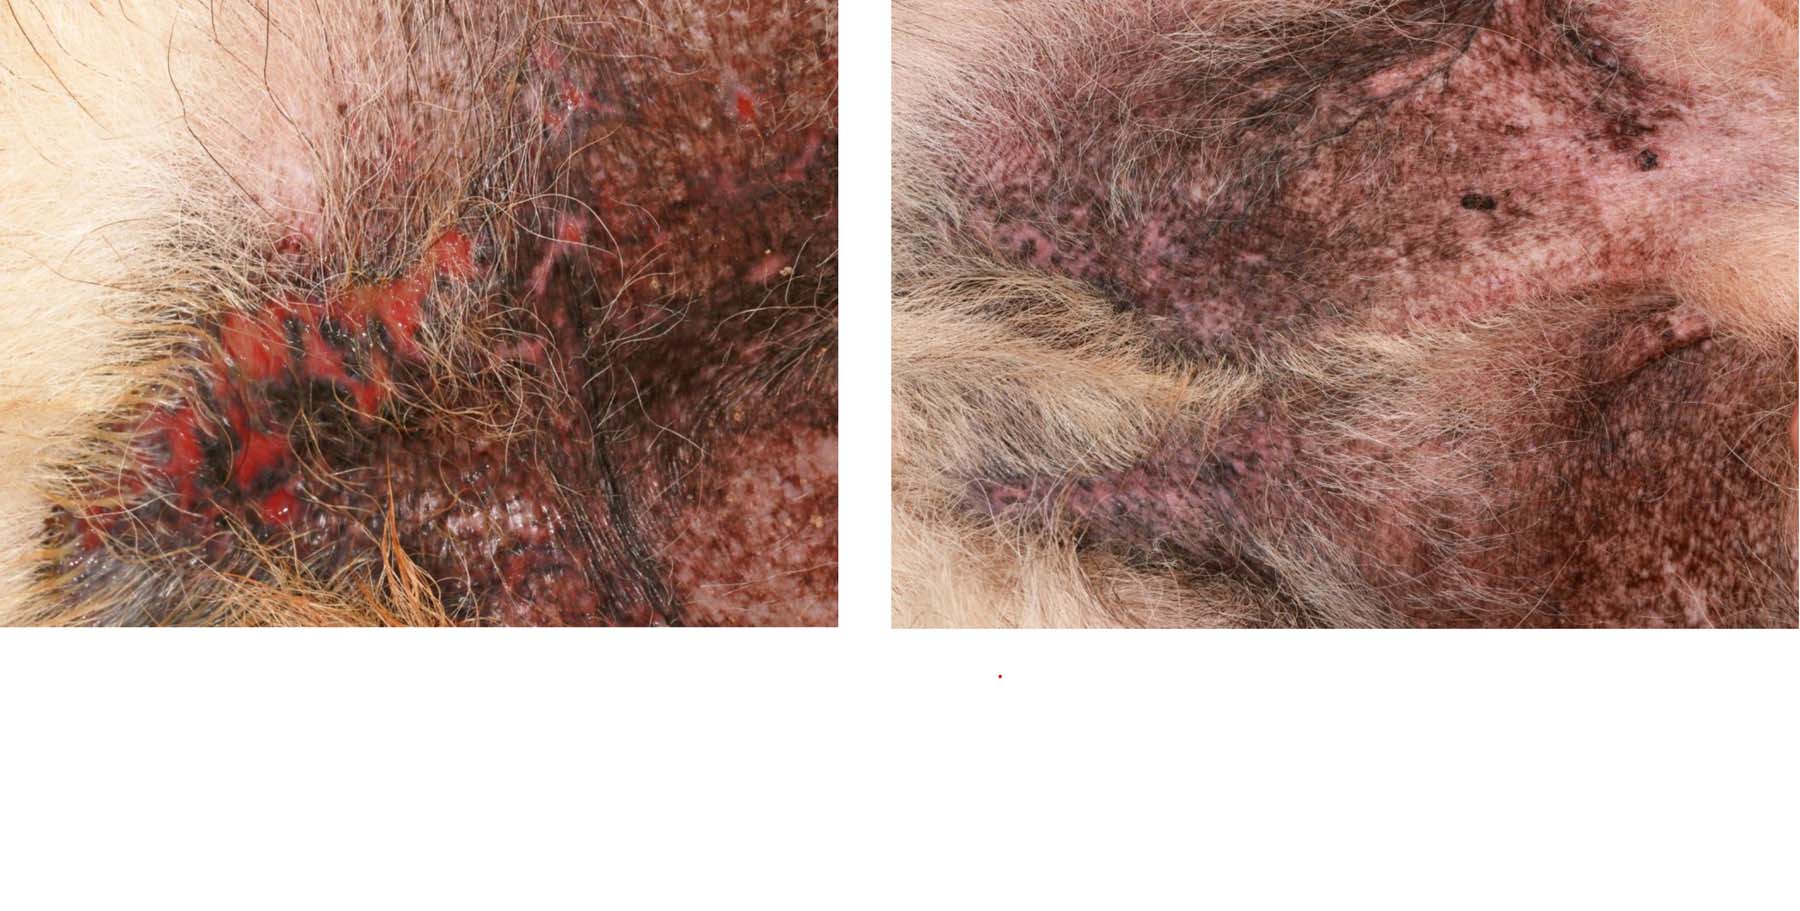 German Shepherd Dog Pyoderma secondary to Canine Atopic Dermatitis: before & after Treatment established long-term Control